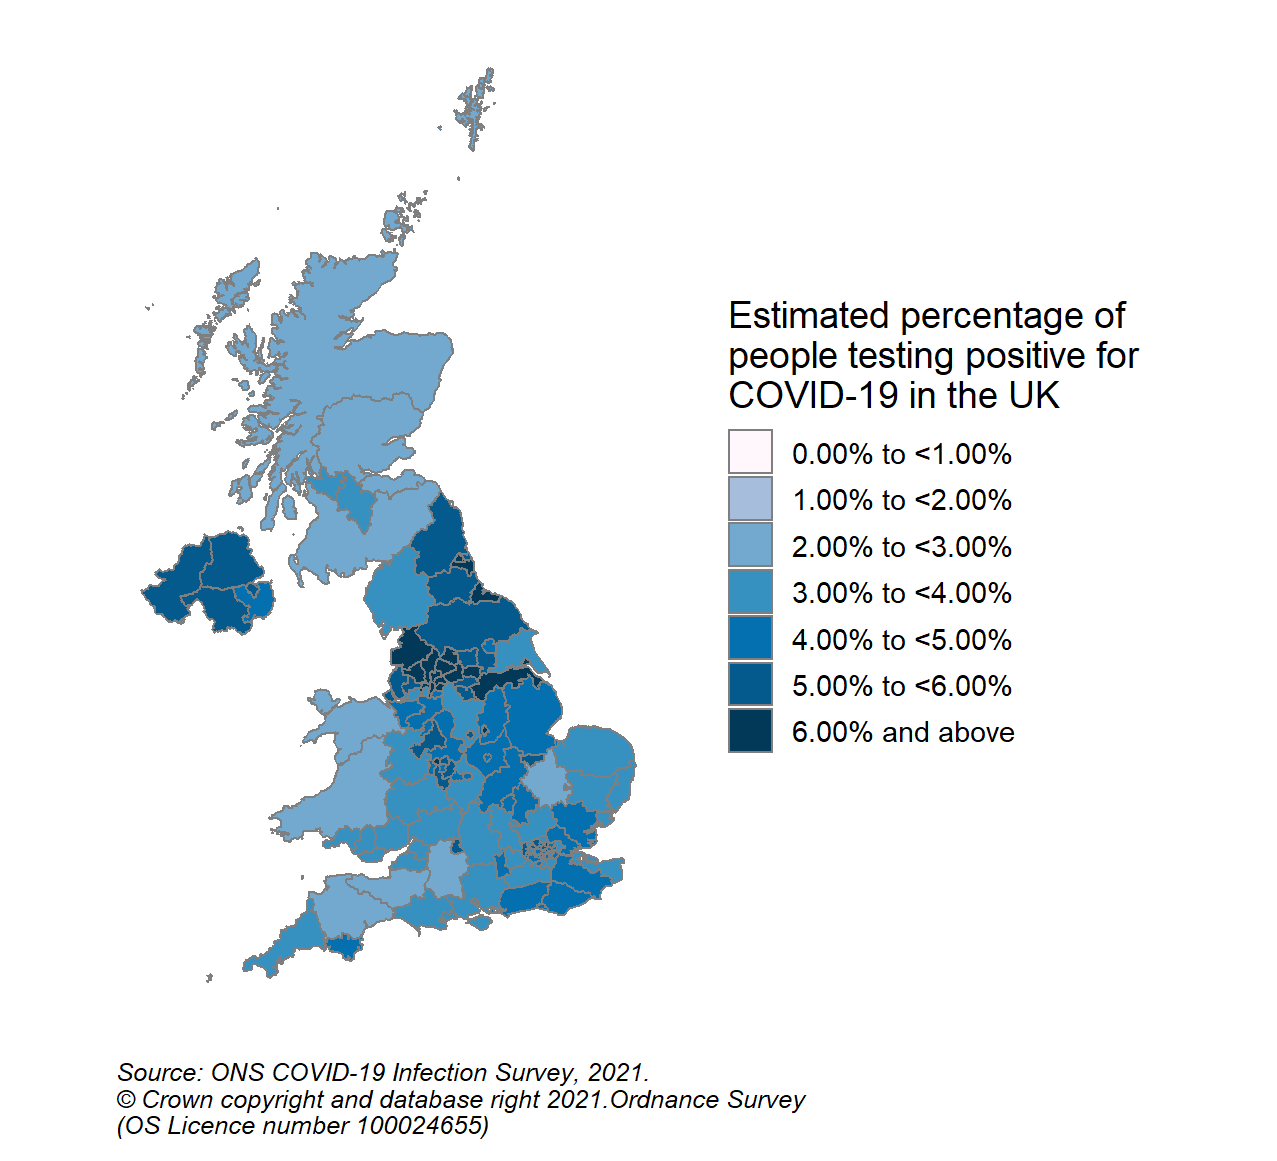 This colour coded map of the UK shows the modelled estimates of the percentage of the private residential population testing positive for COVID-19, by COVID-19 Infection Survey sub-regions. In Scotland, these sub-regions are comprised of Health Boards. The regions are: 123 - NHS Grampian, NHS Highland, NHS Orkney, NHS Shetland and NHS Western Isles, 124 - NHS Fife, NHS Forth Valley and NHS Tayside, 125 - NHS Greater Glasgow & Clyde, 126 - NHS Lothian, 127 - NHS Lanarkshire, 128 - NHS Ayrshire & Arran, NHS Borders and NHS Dumfries & Galloway.  The sub-region with the highest modelled estimate for the percentage of people testing positive was CIS Region 127 (NHS Lanarkshire) at 3.78% (95% credible interval: 3.15% to 4.51%).  The sub-region with the lowest modelled estimate was Region 123 (NHS Grampian, NHS Highland, NHS Orkney, NHS Shetland and NHS Western Isles), at 2.47% (95% credible interval: 2.04% to 3.08%).